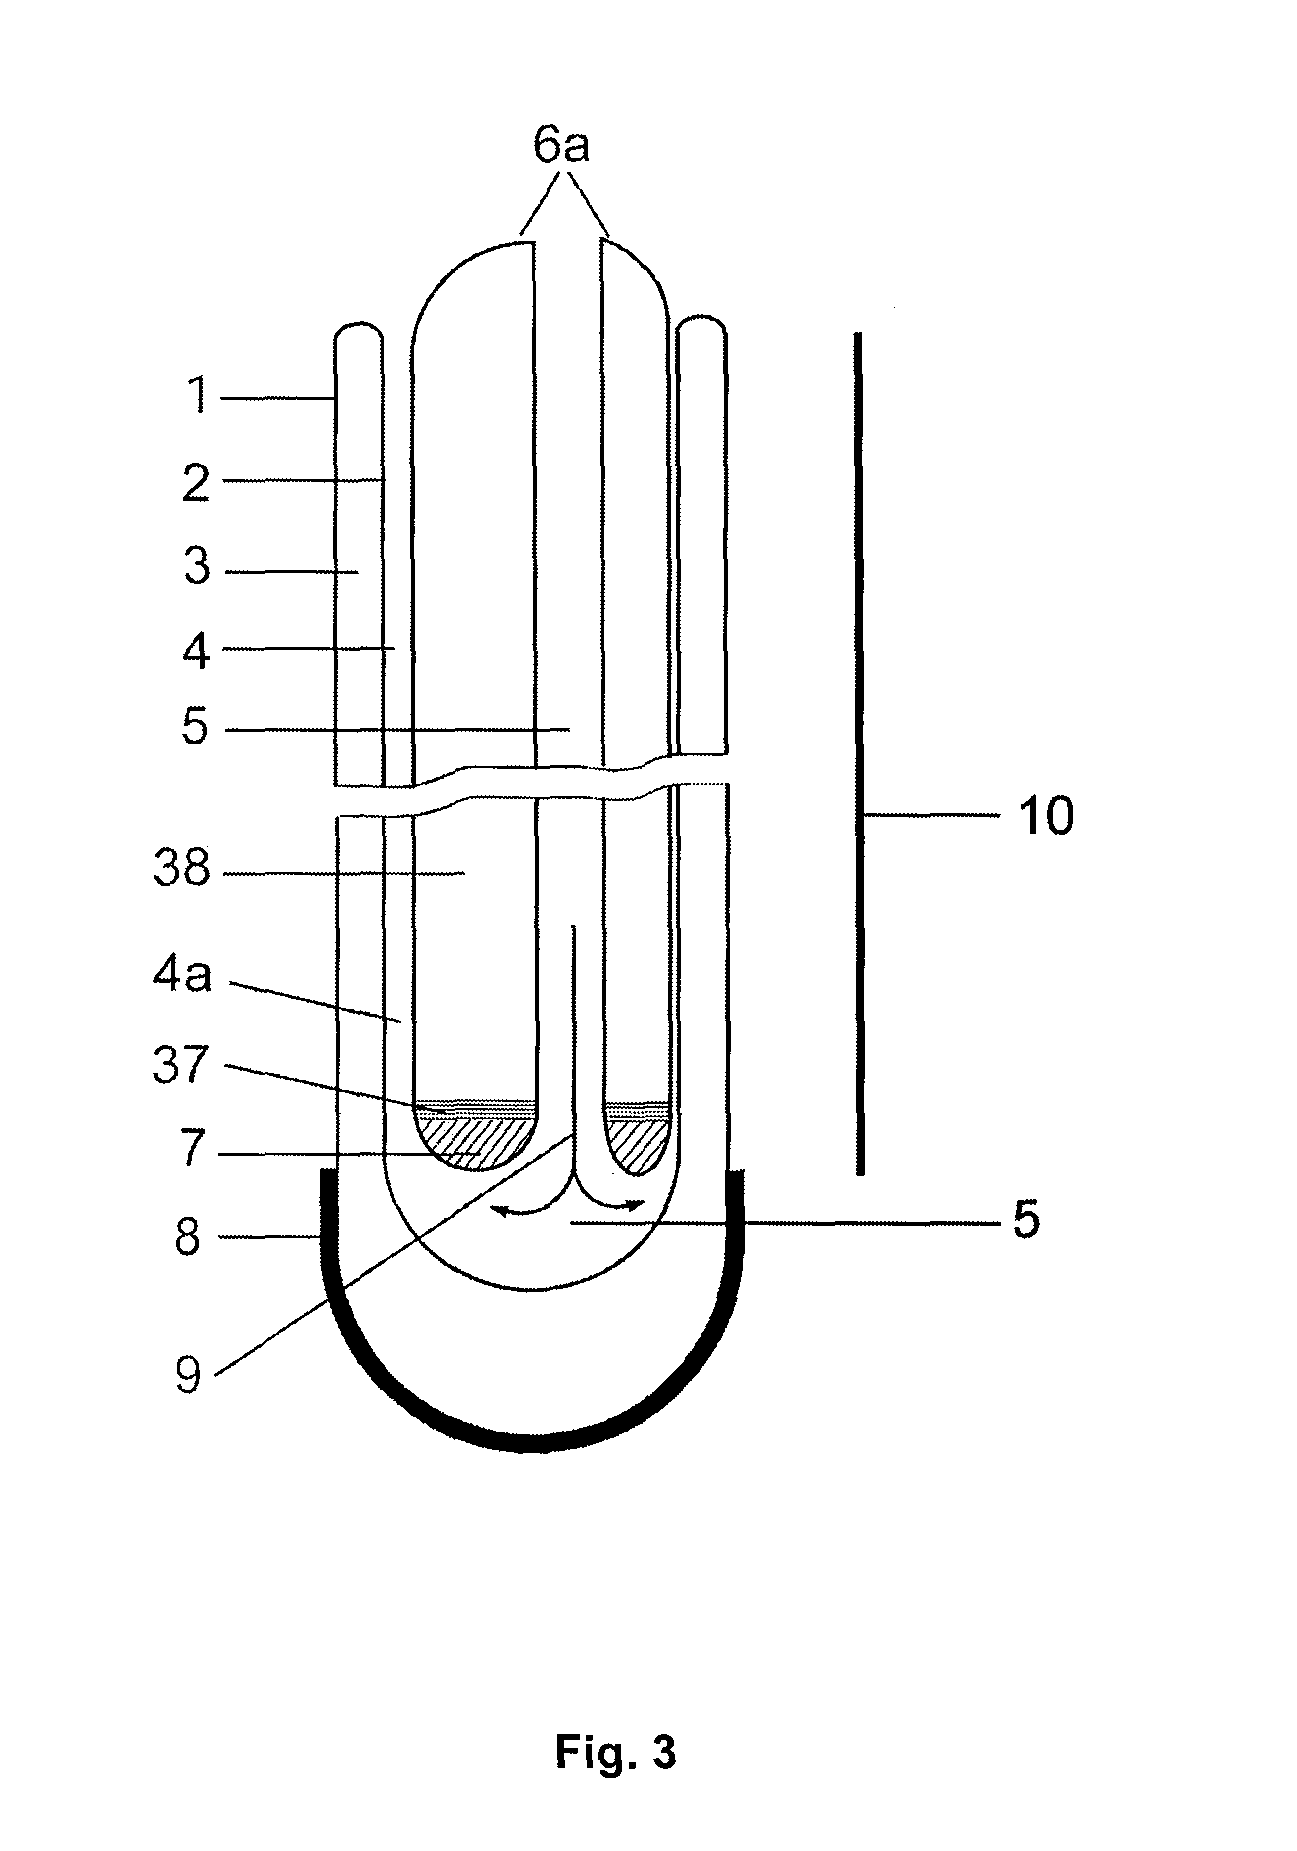 Tube collector with variable thermal conductivity of the coaxial tube